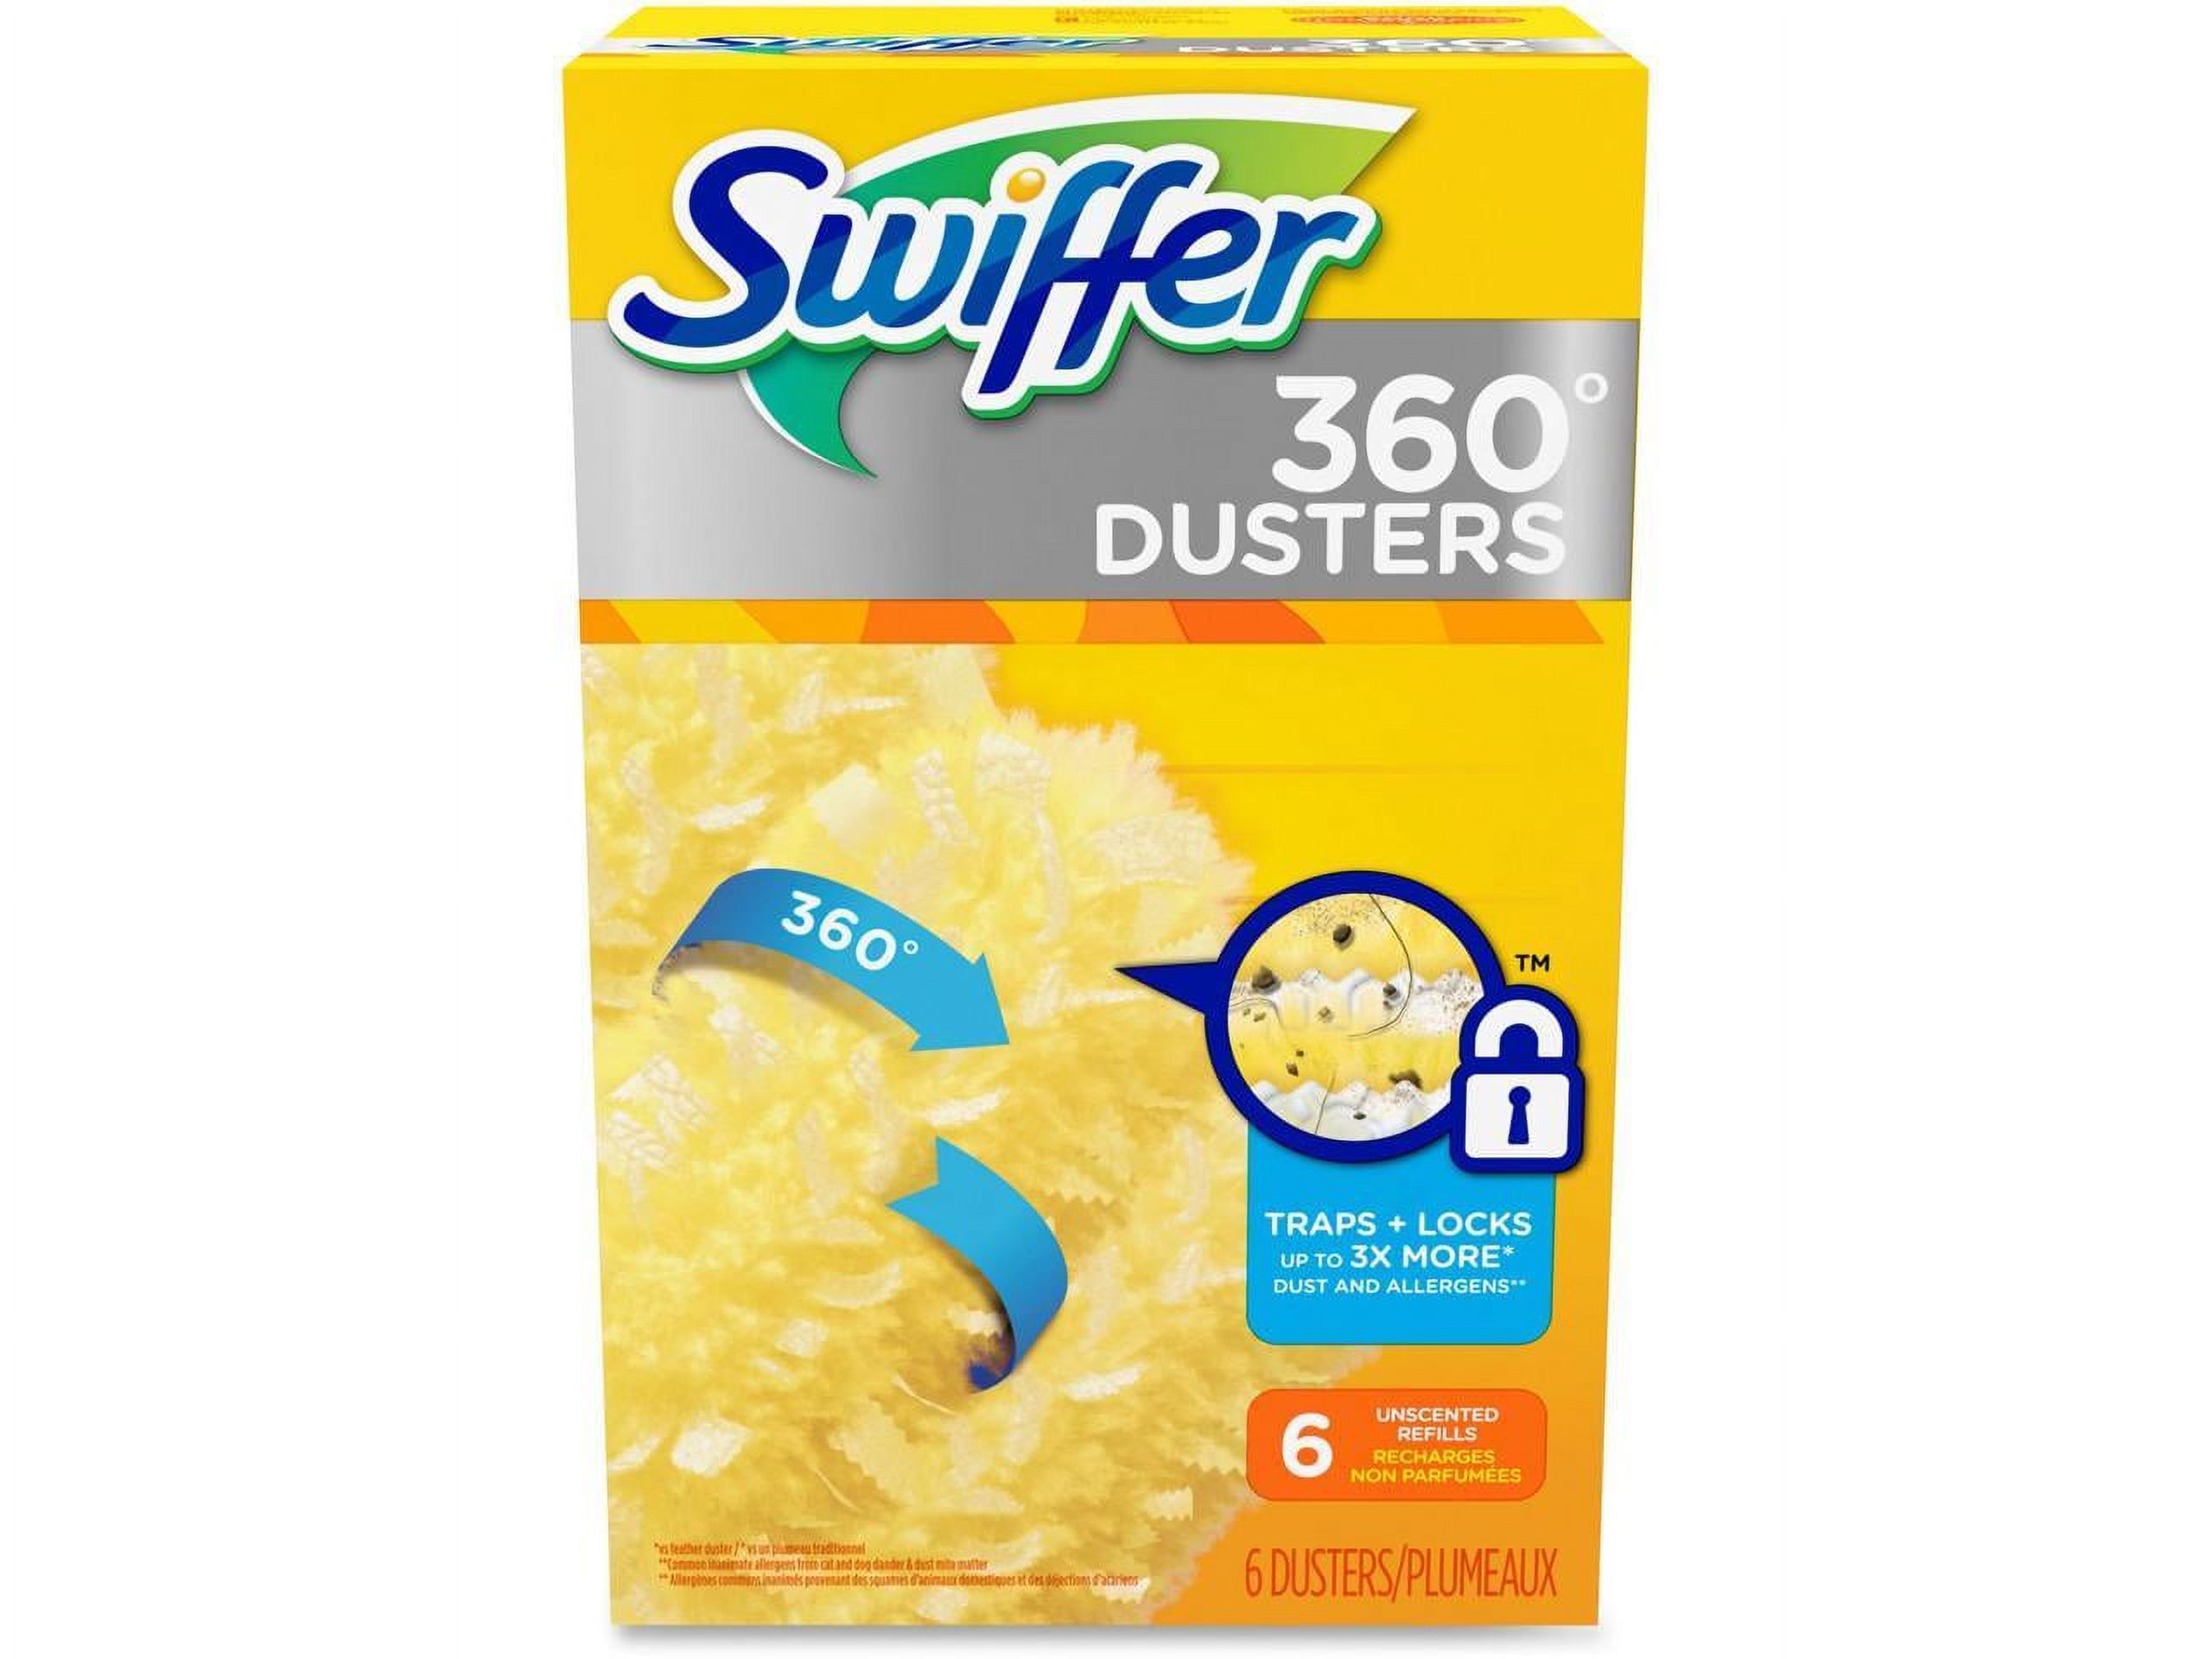 Swiffer Heavy Duty Duster, Refills, 6 Count, Yellow, Unscented - image 4 of 9